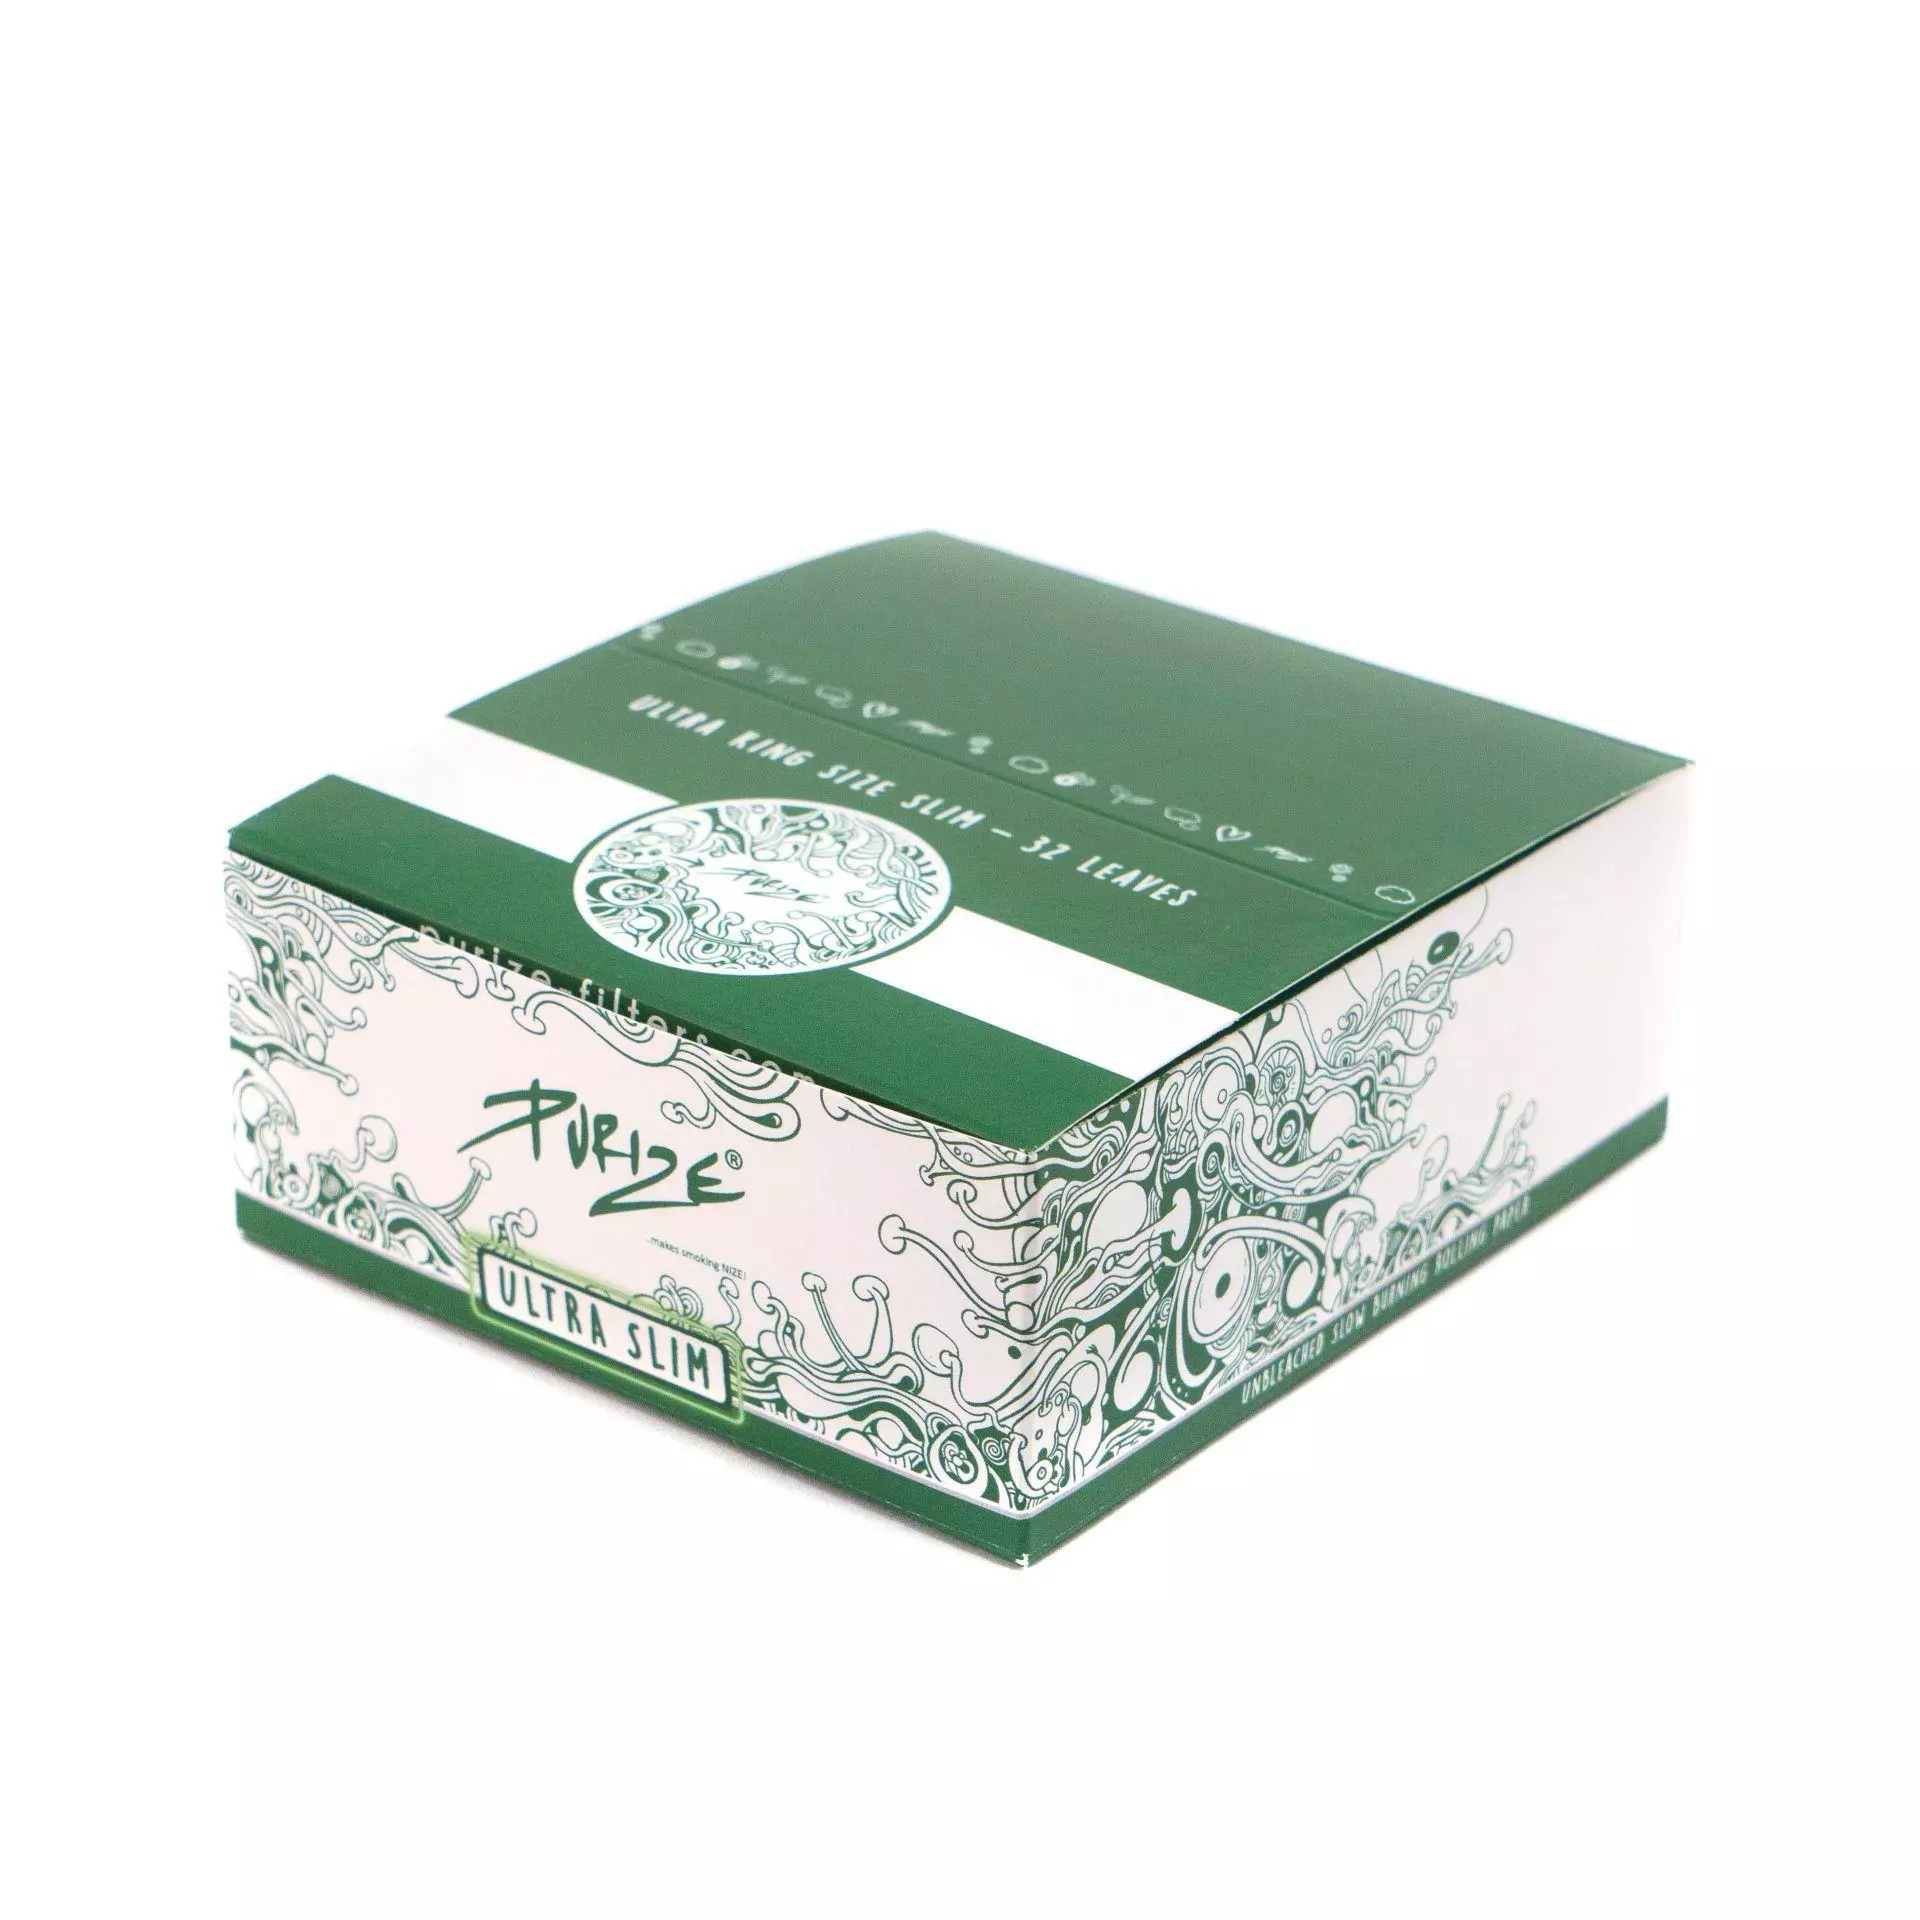 Purize Papers Ultra King Size Slim